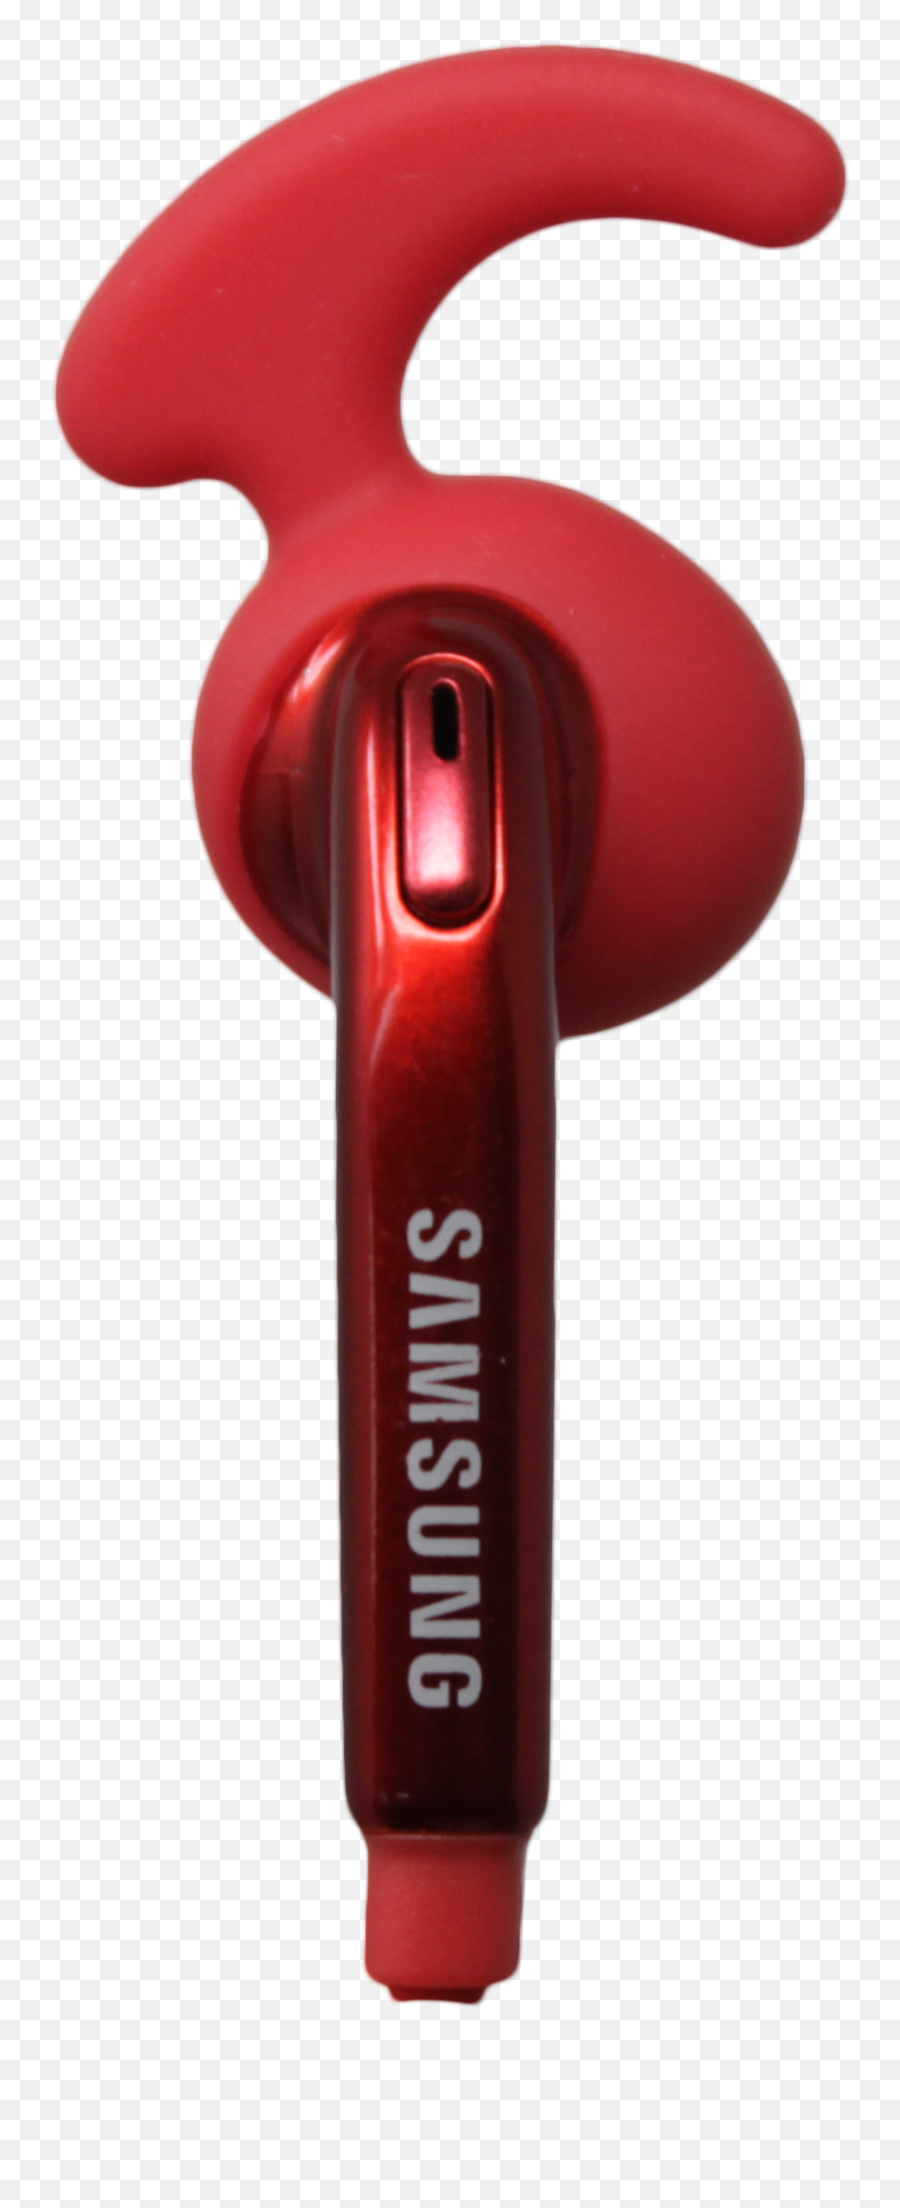 Samsung Active Inear Headset Red Eo - Eg920br Made In Vietnam For Samsung Galaxy Phones And Other Smartphone Devices In Nonretail Package Samsung Led Tv 40 Inch Png,Icon Collection Jewelry Made In Vietnam